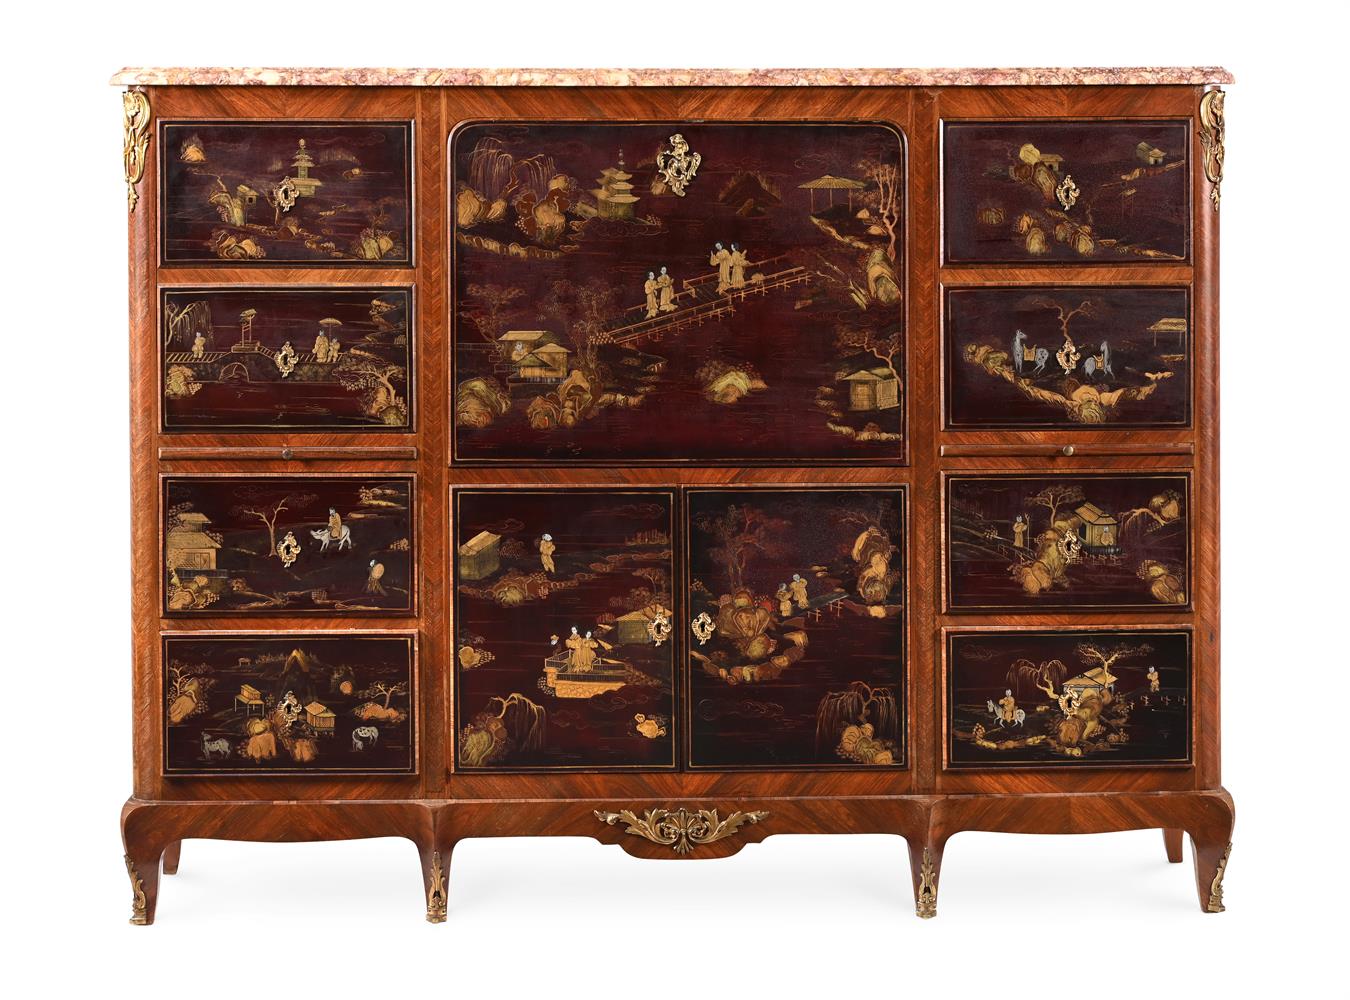 Y A FRENCH KINGWOOD, TULIPWOOD, MAROON LACQUER AND GILT METAL MOUNTED SECRETAIRE SIDE CABINET